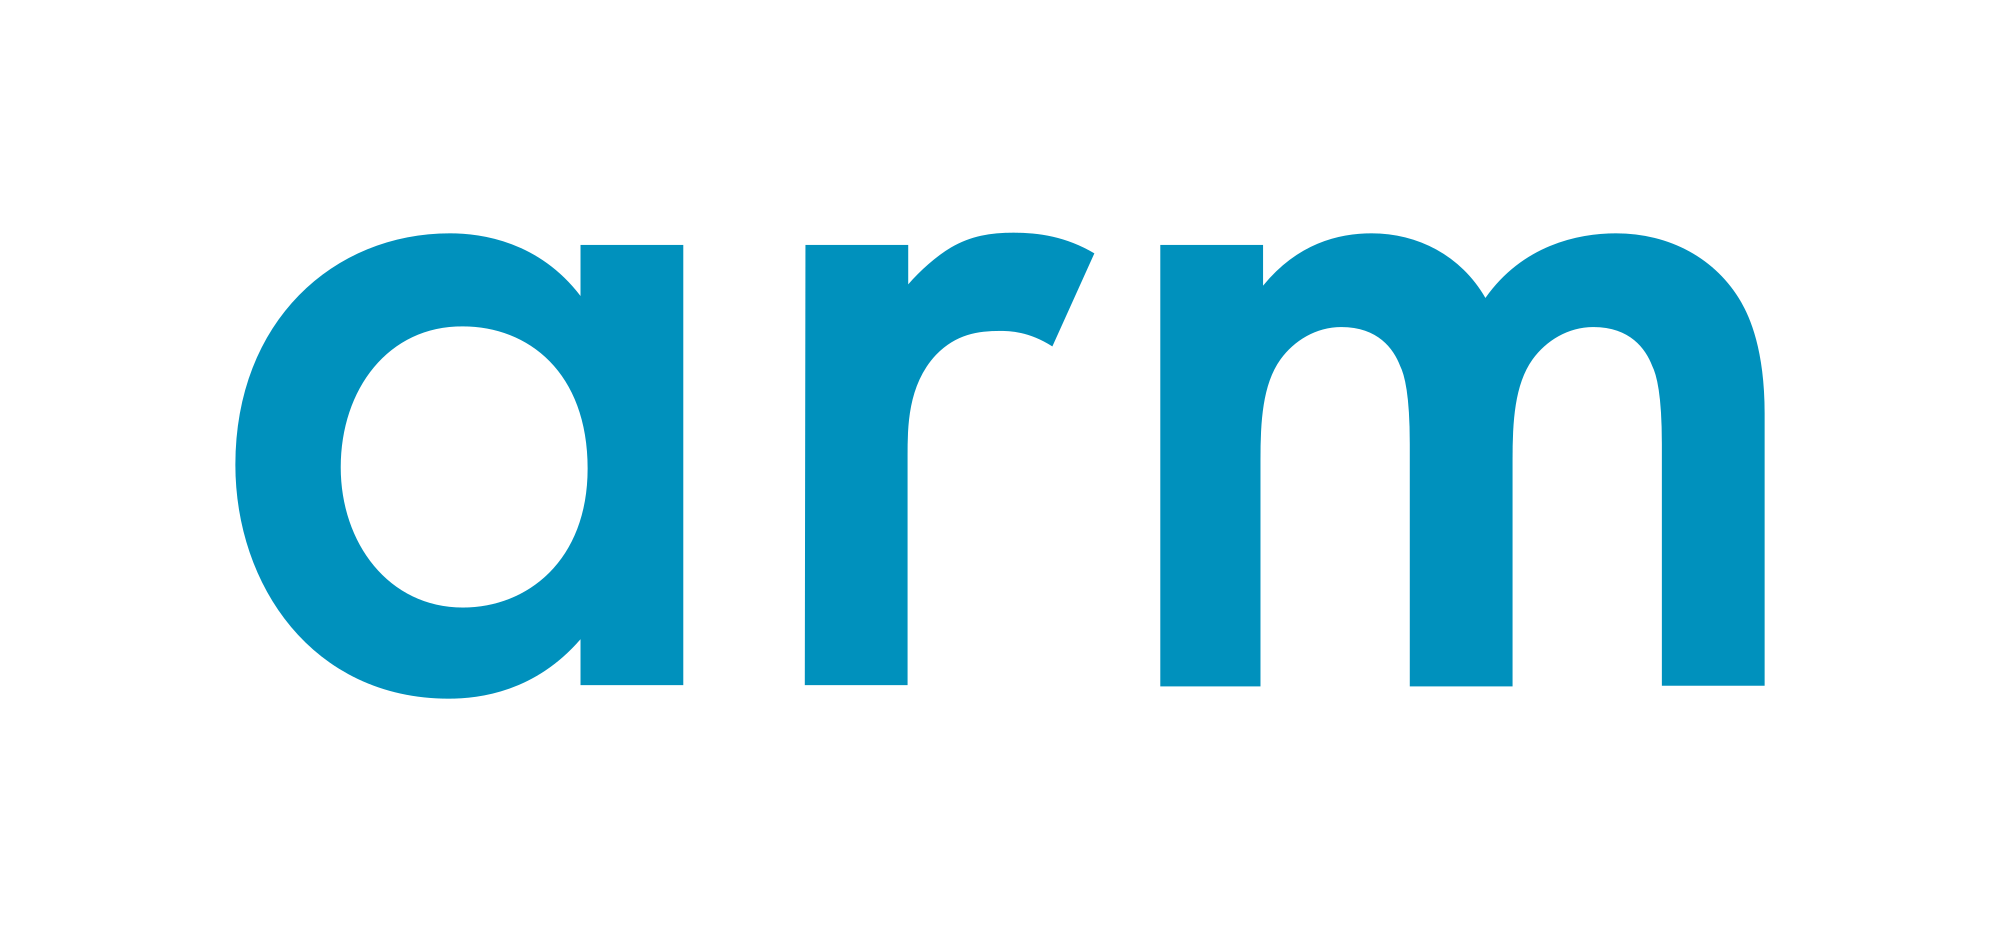 Arm Holdings